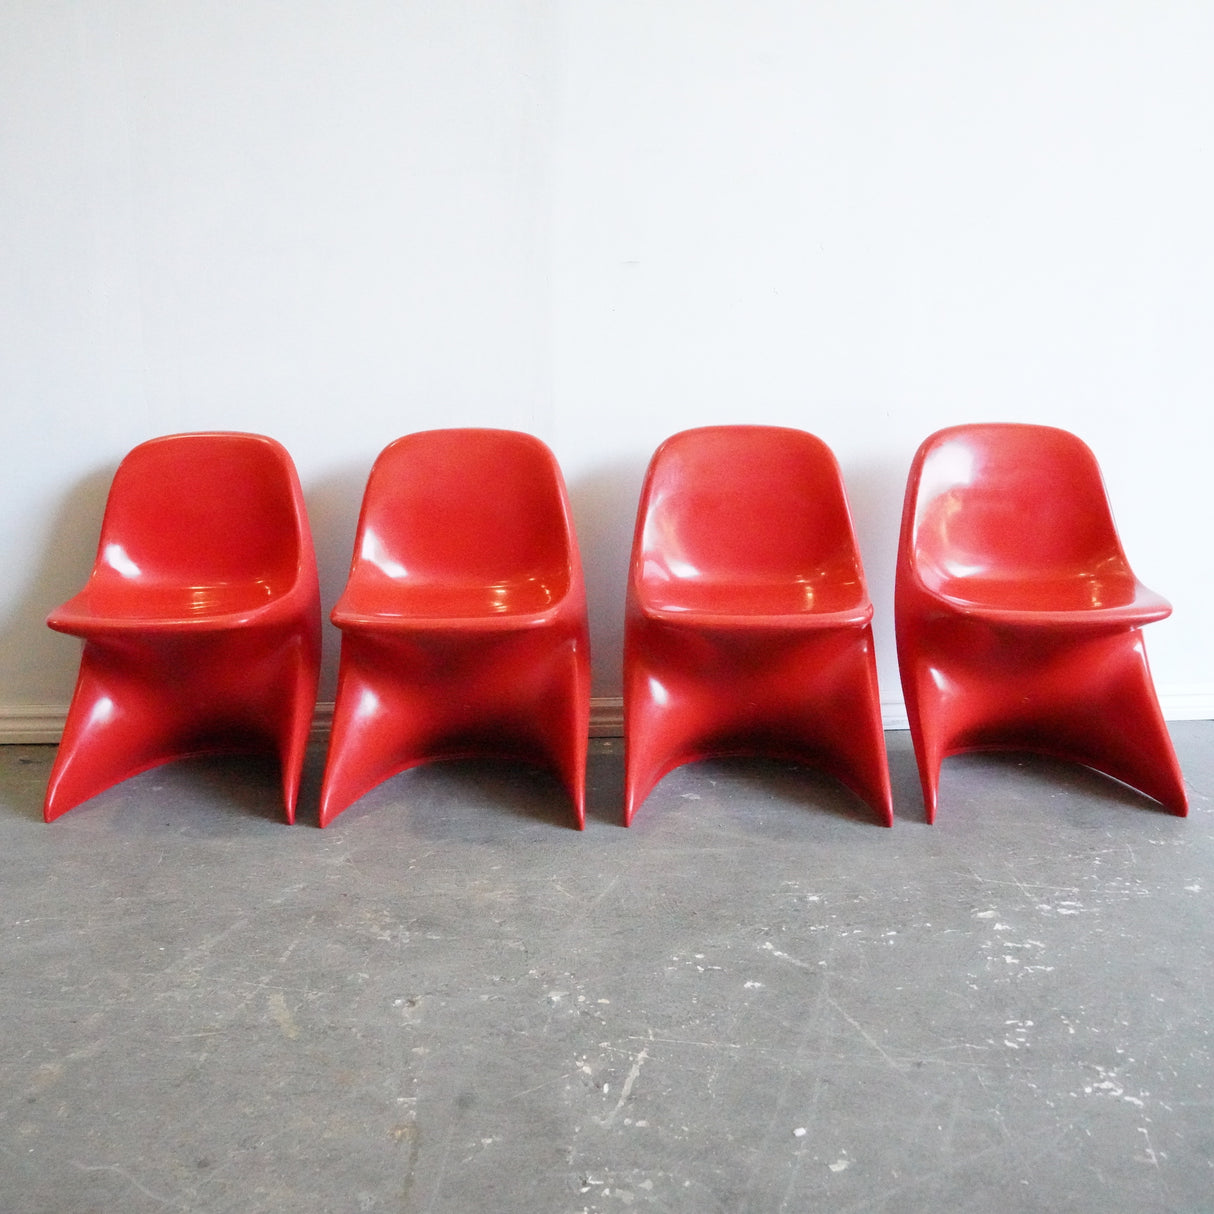 Vintage Children's Chairs by Alexander Begge for Casala, 1970 (Made in West Germany)